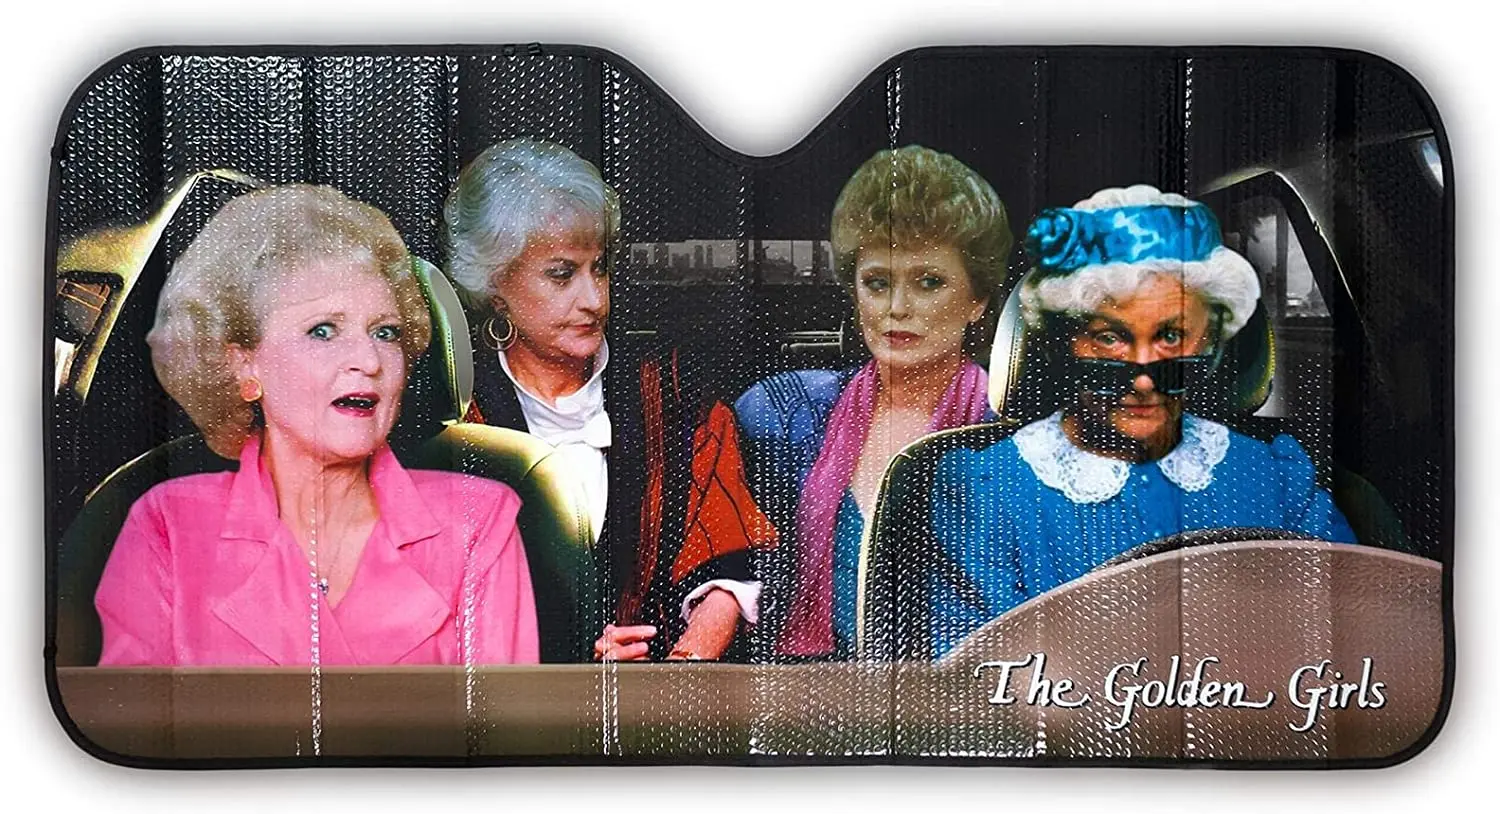 

The Golden Girls Car Sunshade with Sophia Driving - Includes Rose, Blanche, Dorothy - Foldable Novelty Fandom Vehicle Accessorie